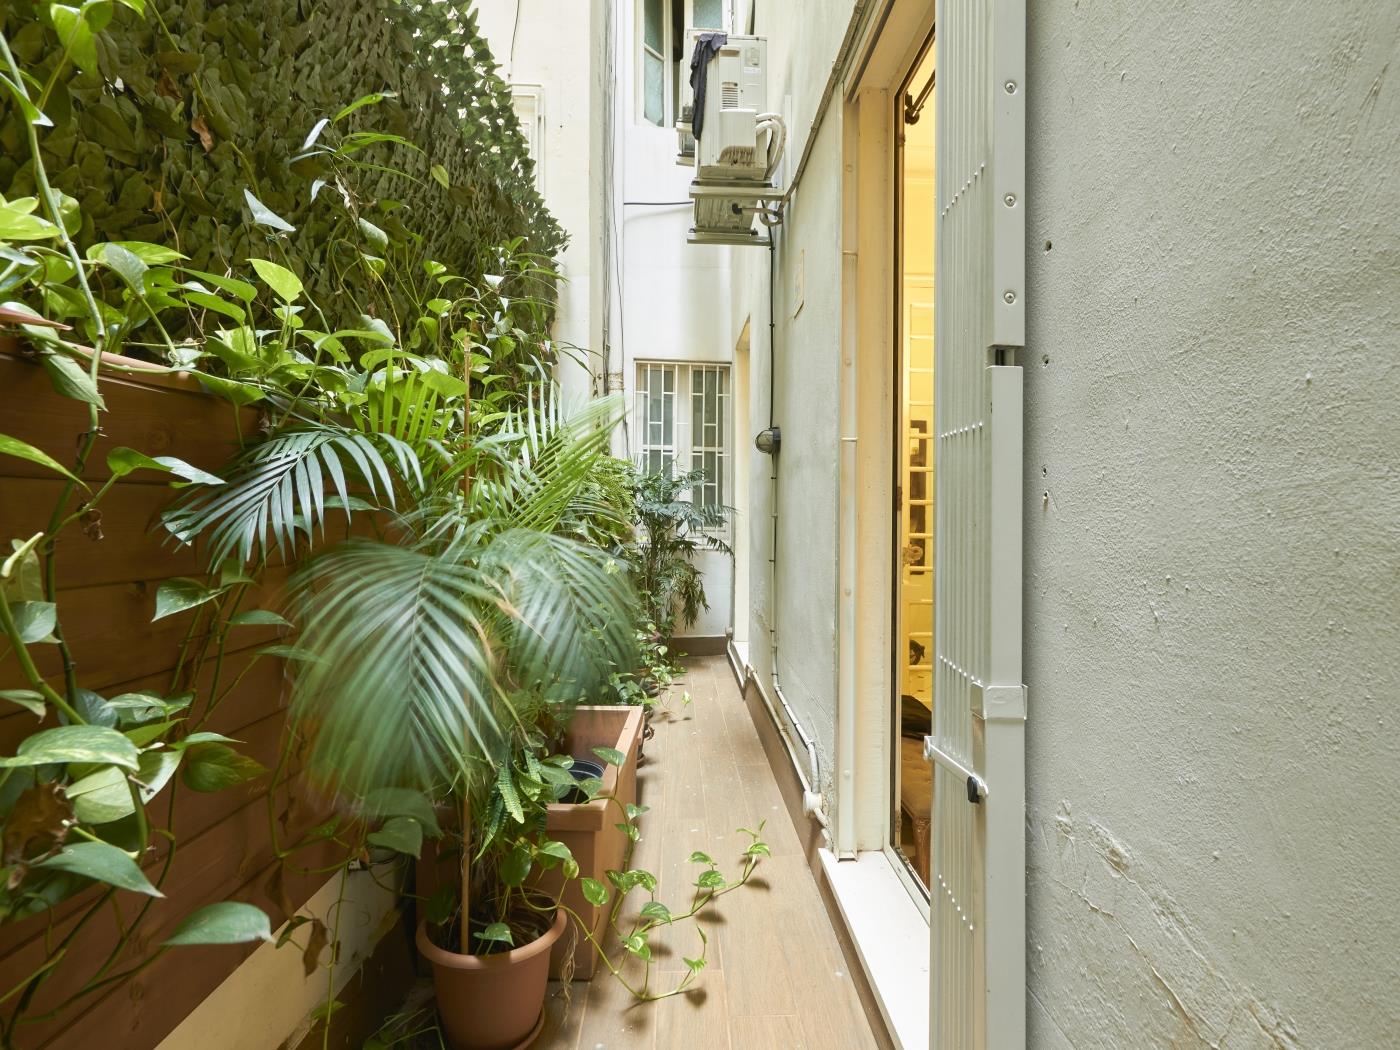 FOR SALE: Bright apartment with terrace in l'Eixample - Price: 749.000 € - My Space Barcelona Apartments